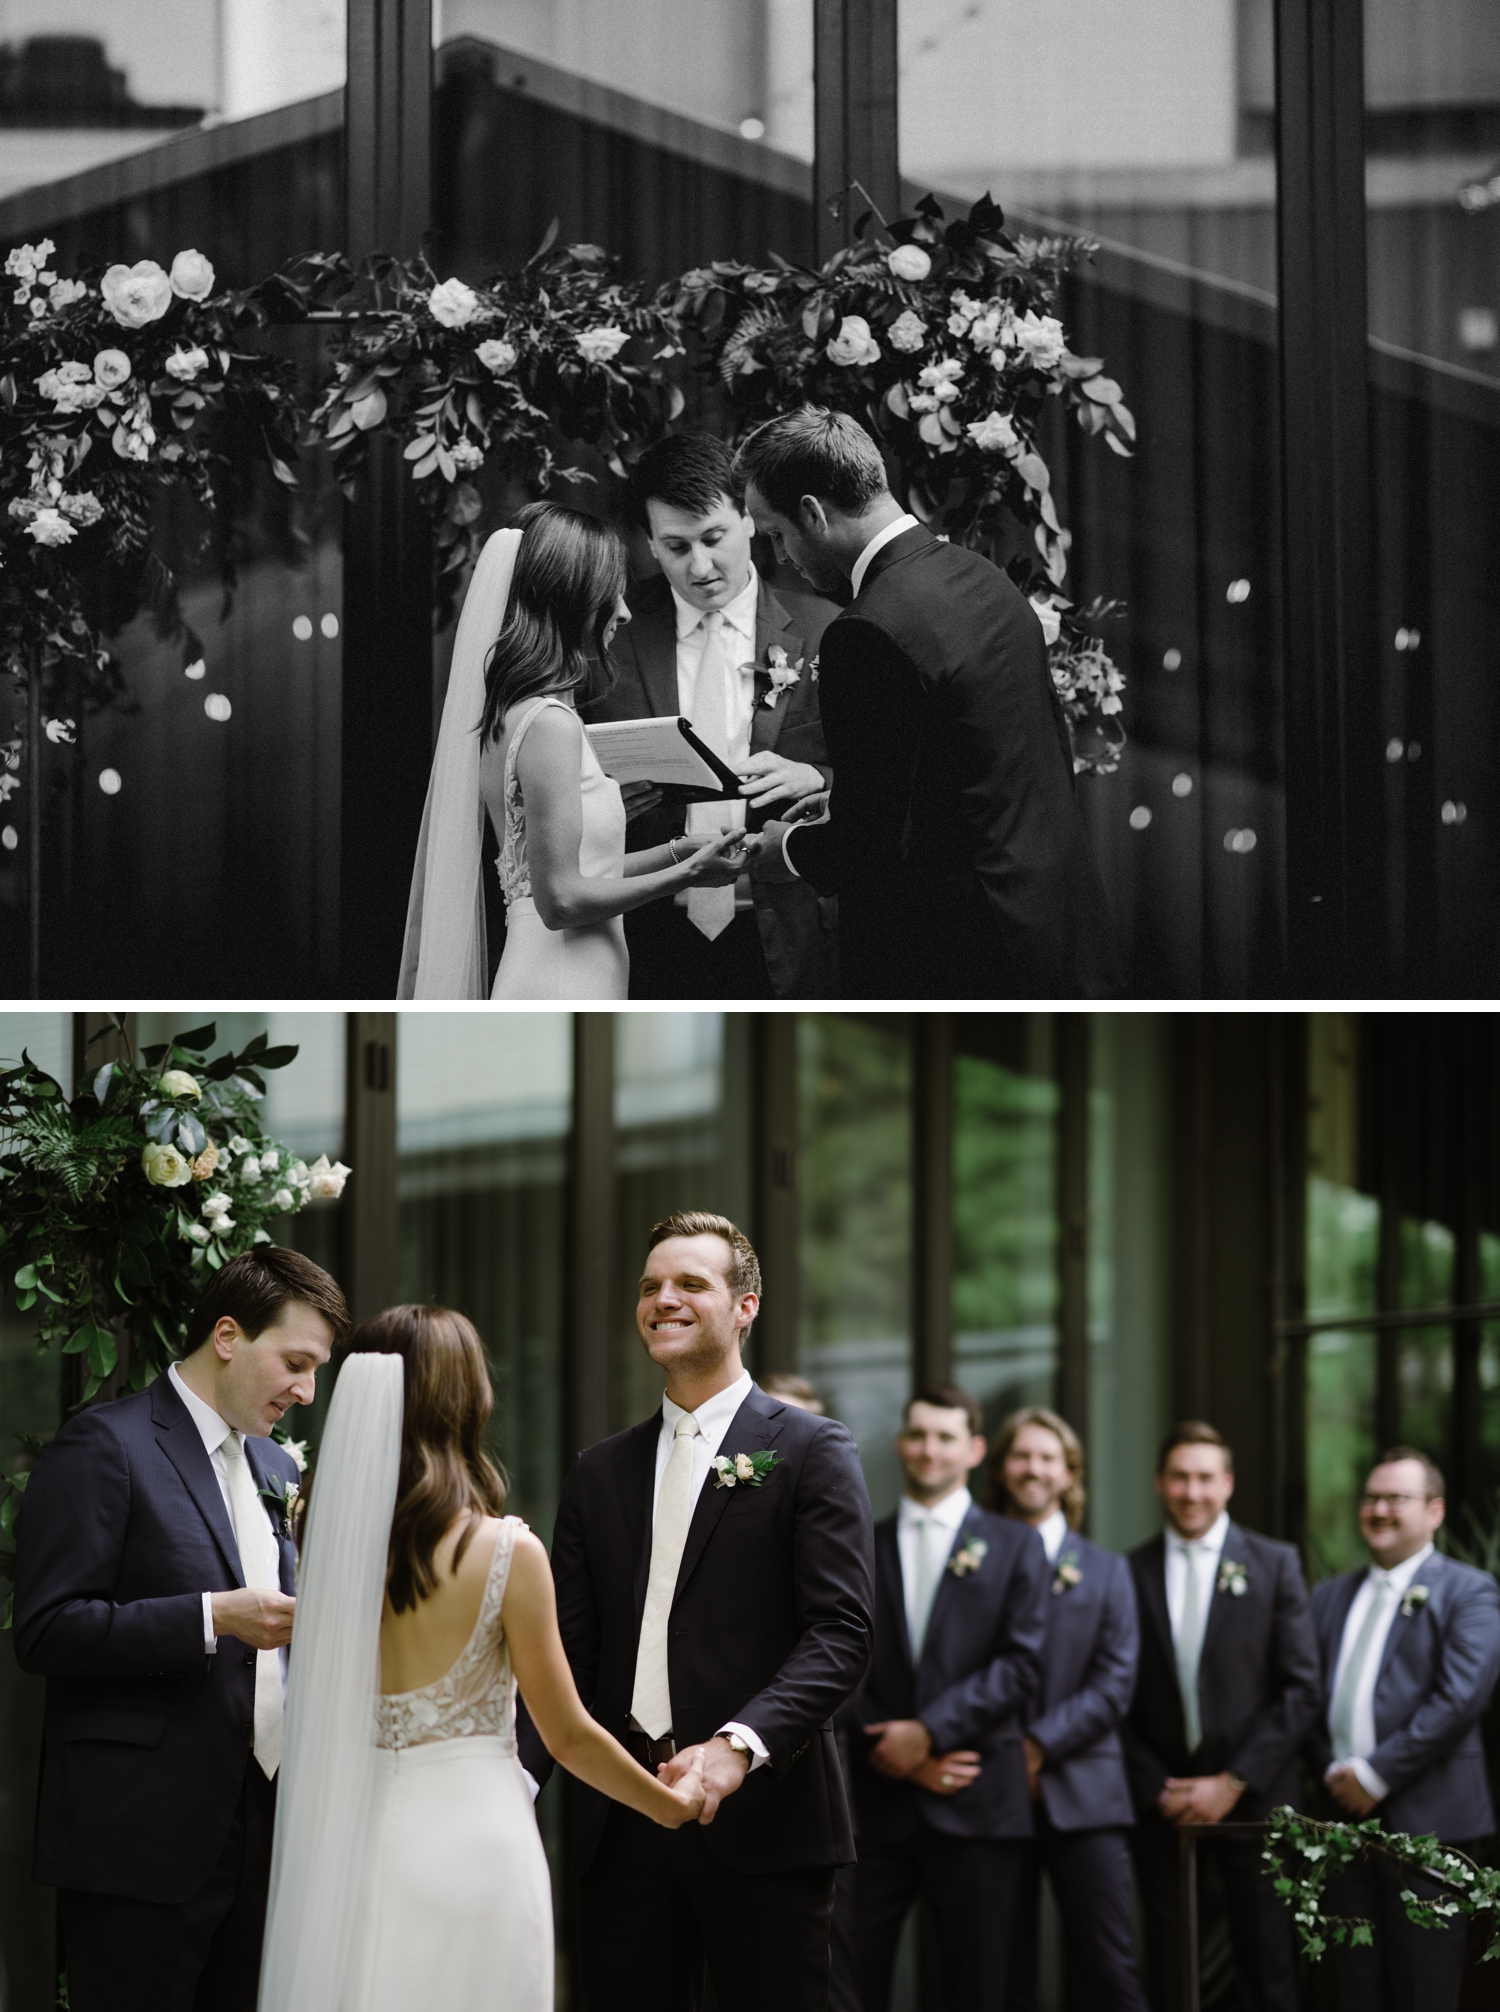 Outdoor wedding ceremony at South Congress Hotel